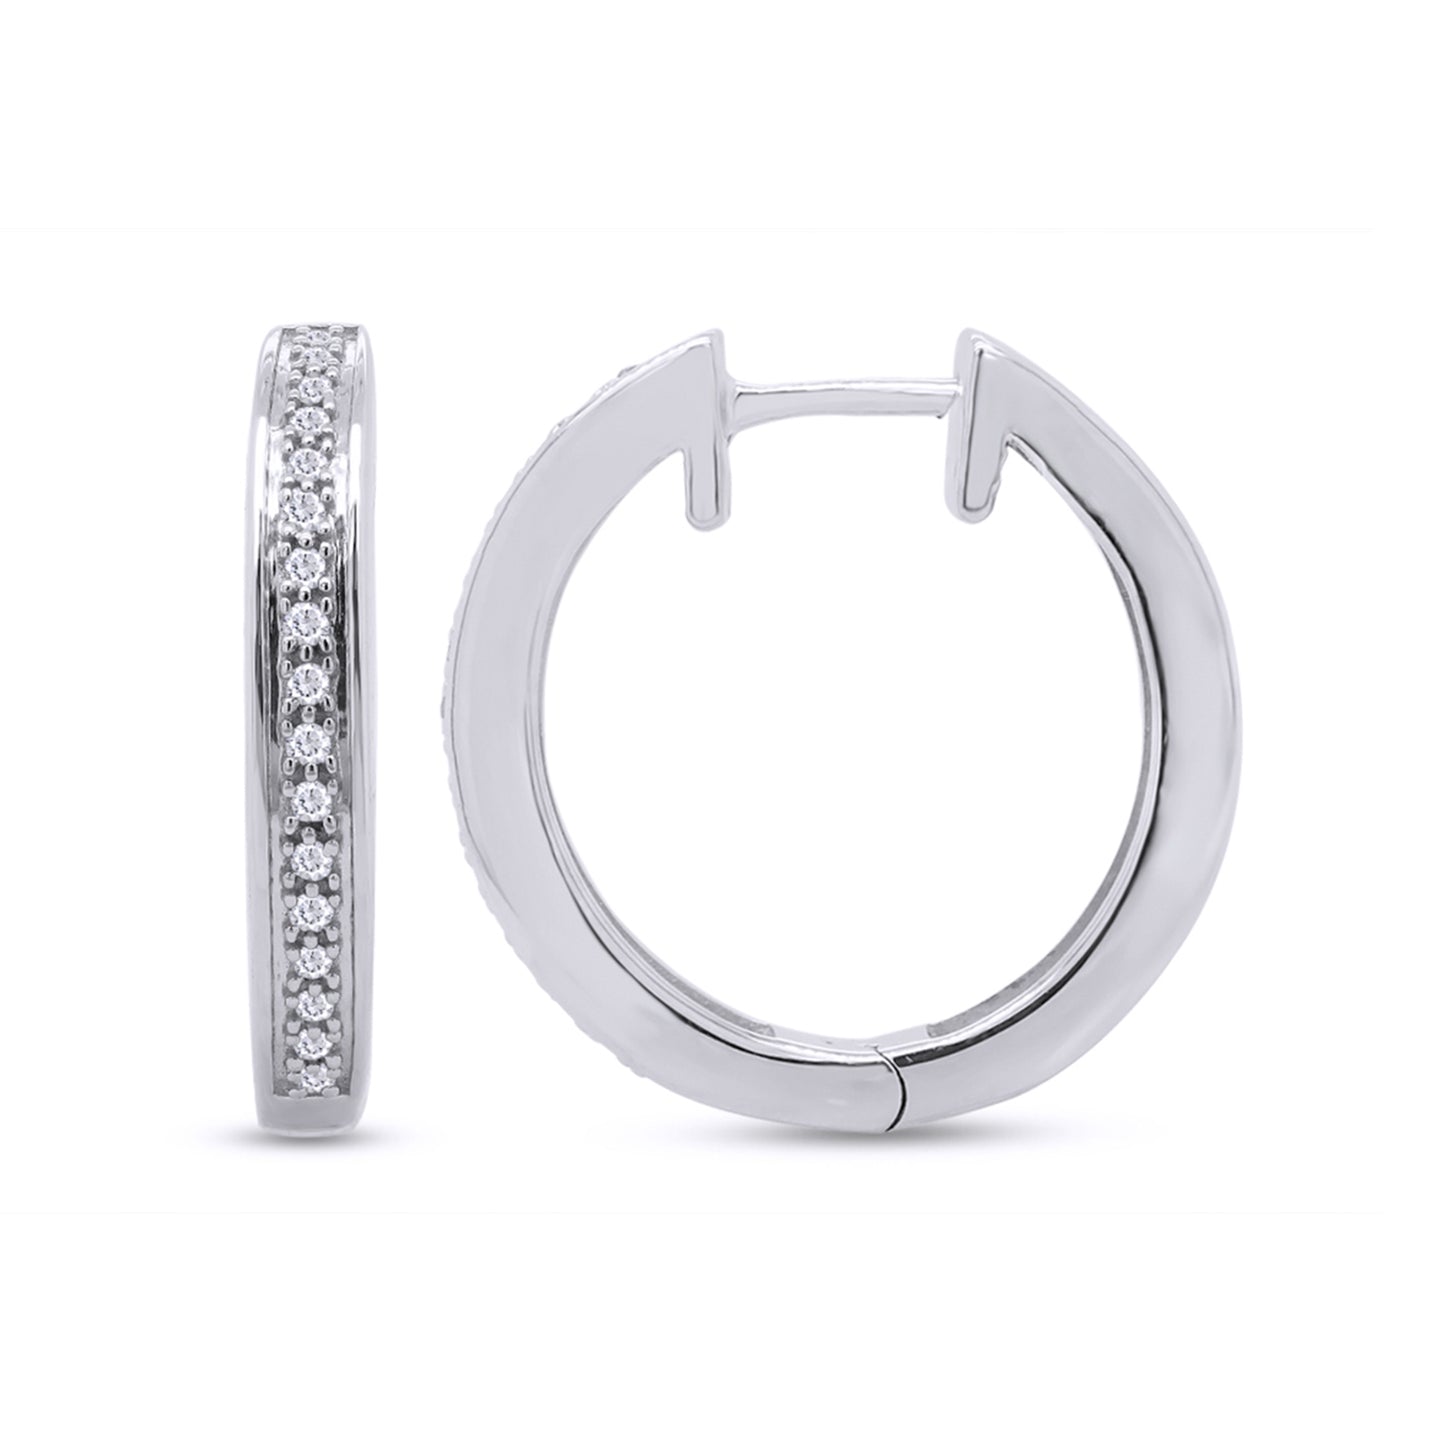 Load image into Gallery viewer, 1/10 CT Round Cut White Natural Diamond Hoop Earrings for Women in 925 Sterling Silver (0.10 Cttw)
